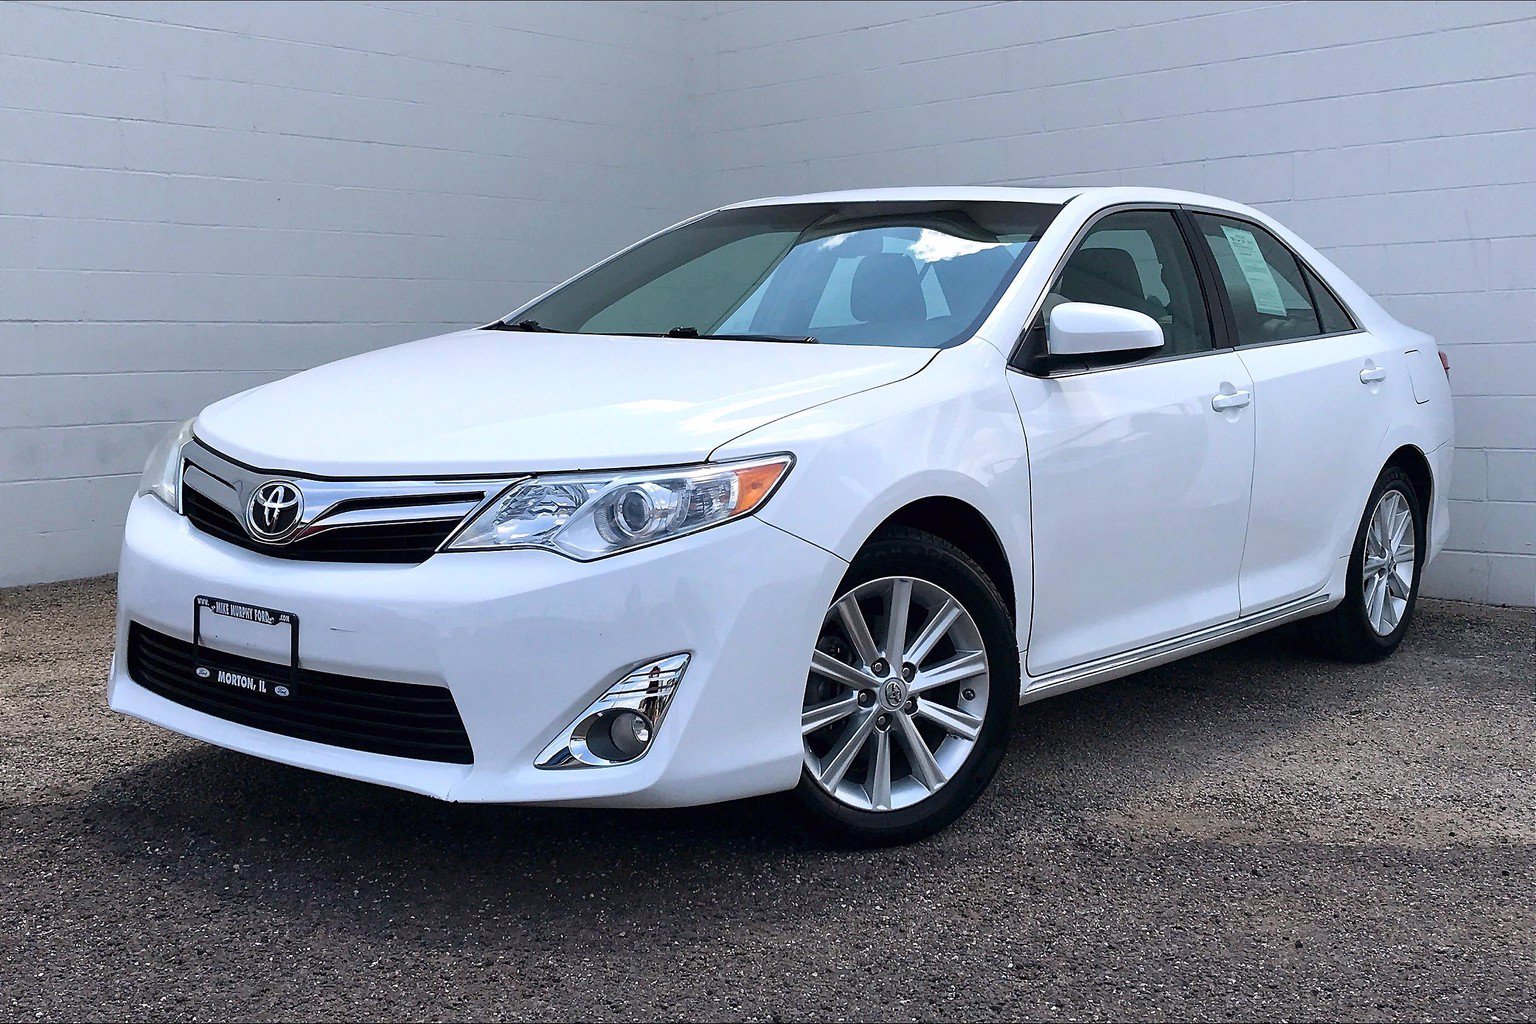 Pre-Owned 2012 Toyota Camry XLE 4D Sedan in Morton #505754 | Mike ...